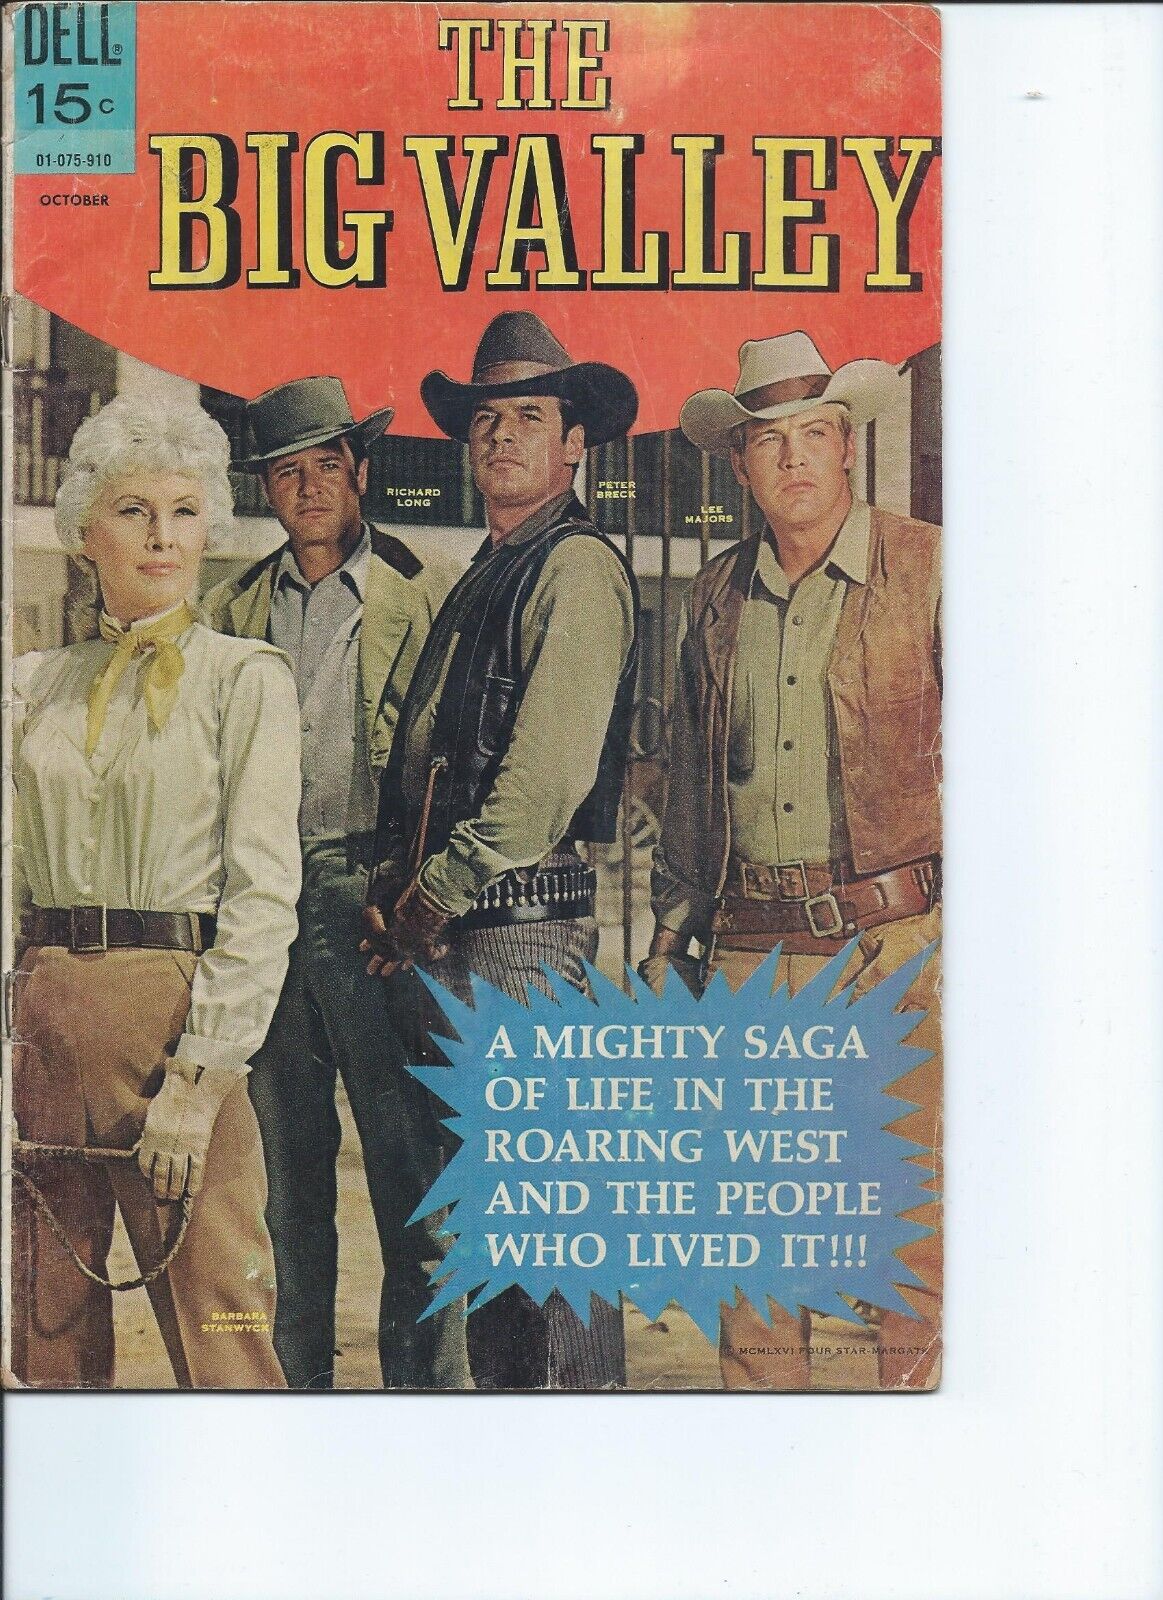 SILVER AGE WESTERN COMICS! THE BIG VALLEY NO. 6 (1969) IN GOOD+ CONDITION